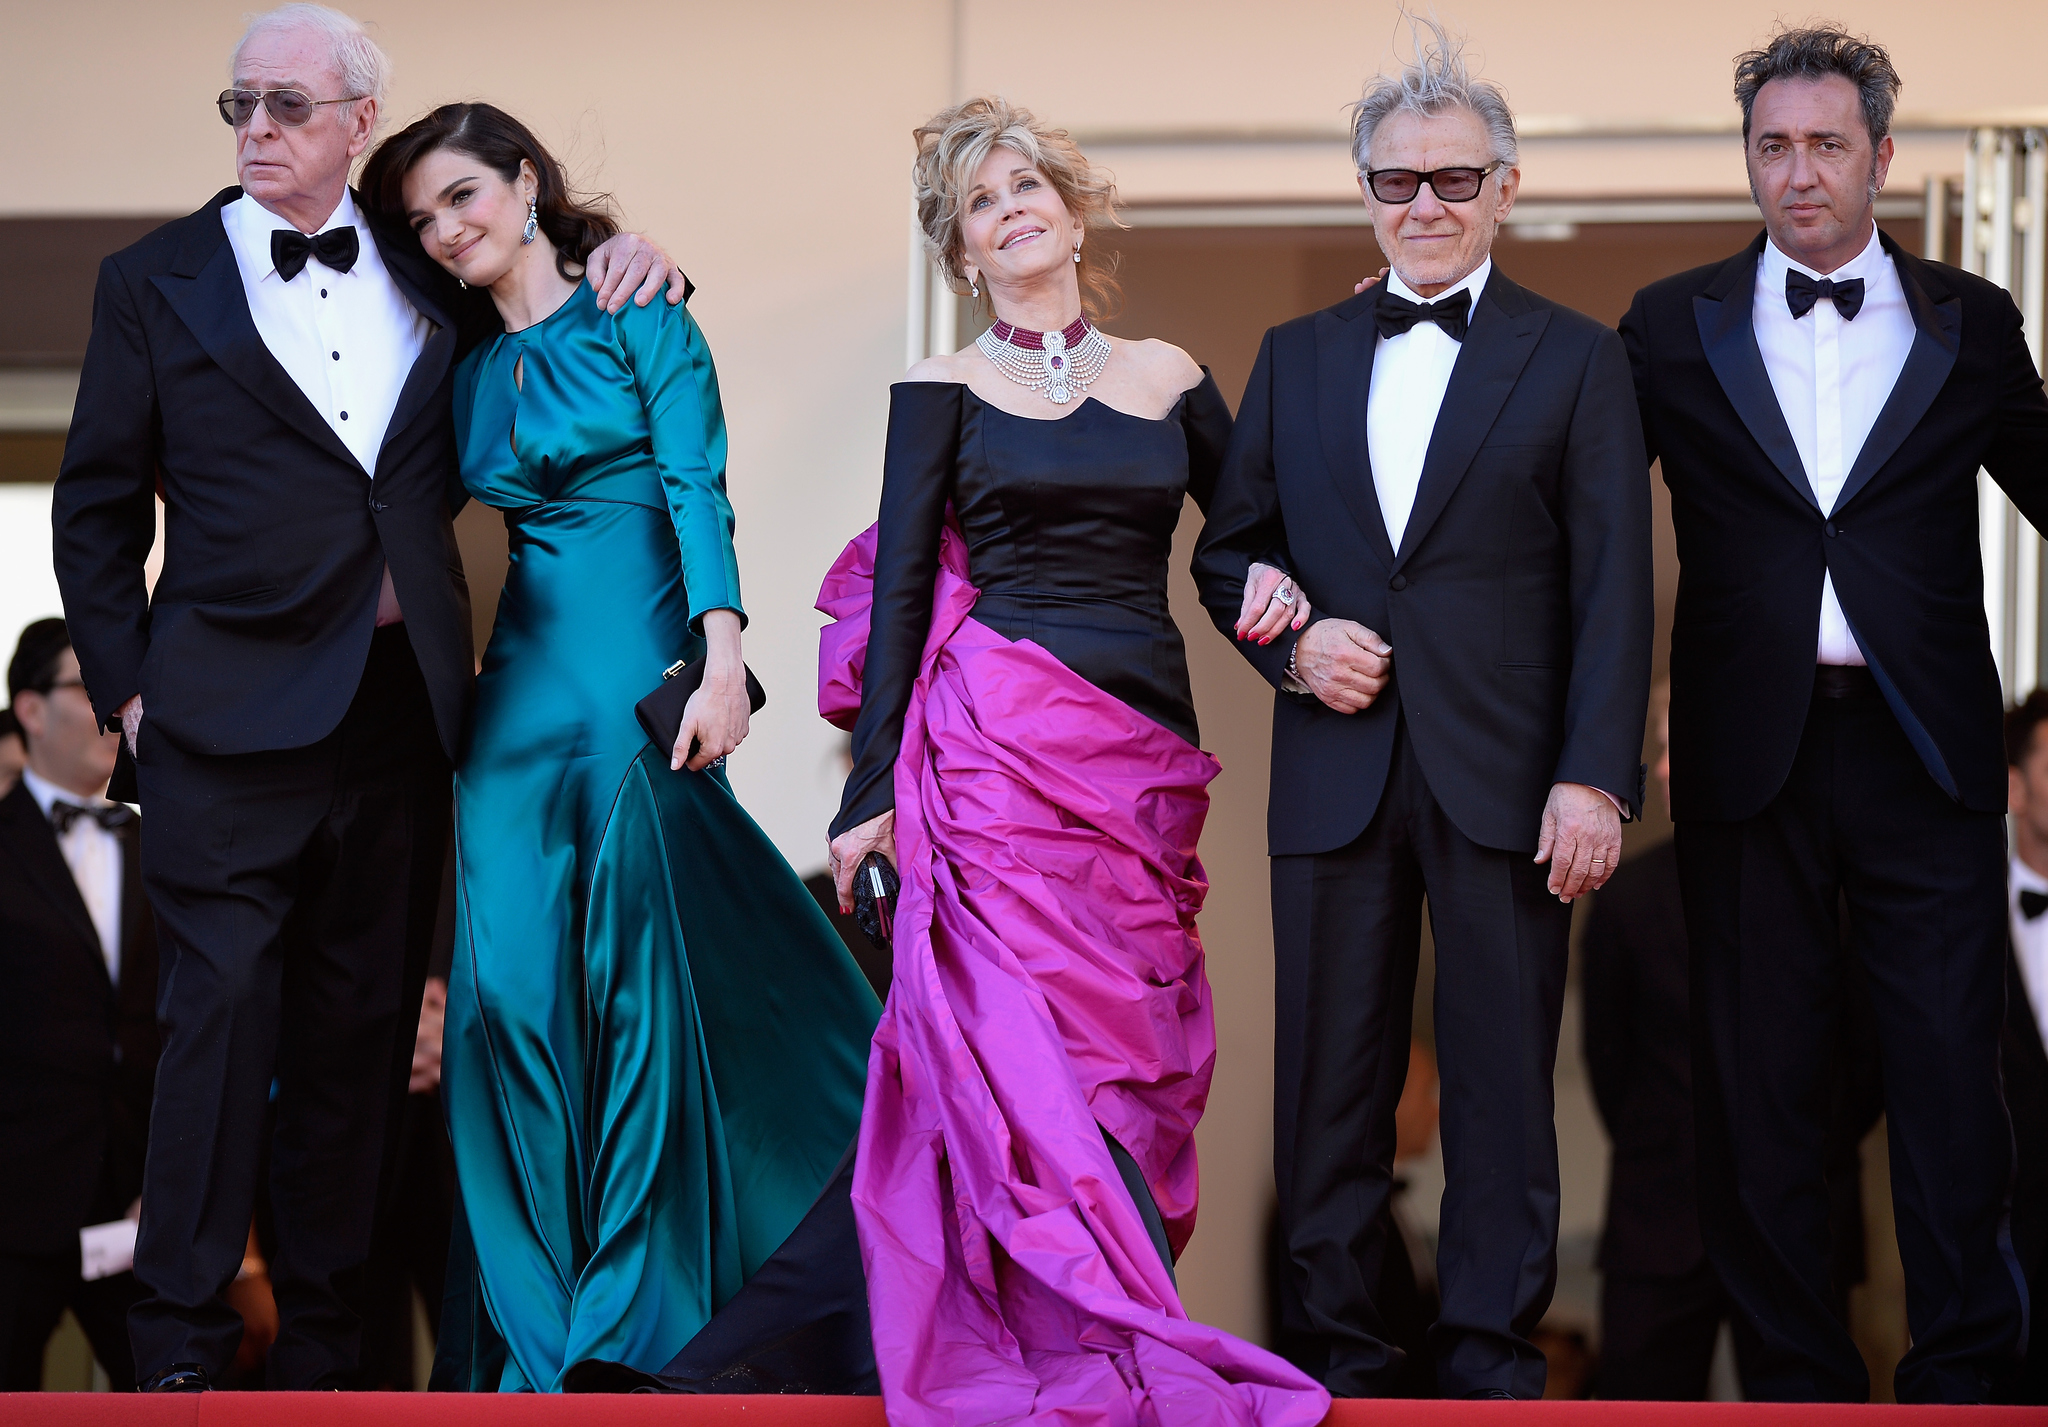 Harvey Keitel, Michael Caine, Jane Fonda, Rachel Weisz and Paolo Sorrentino at event of Youth (2015)